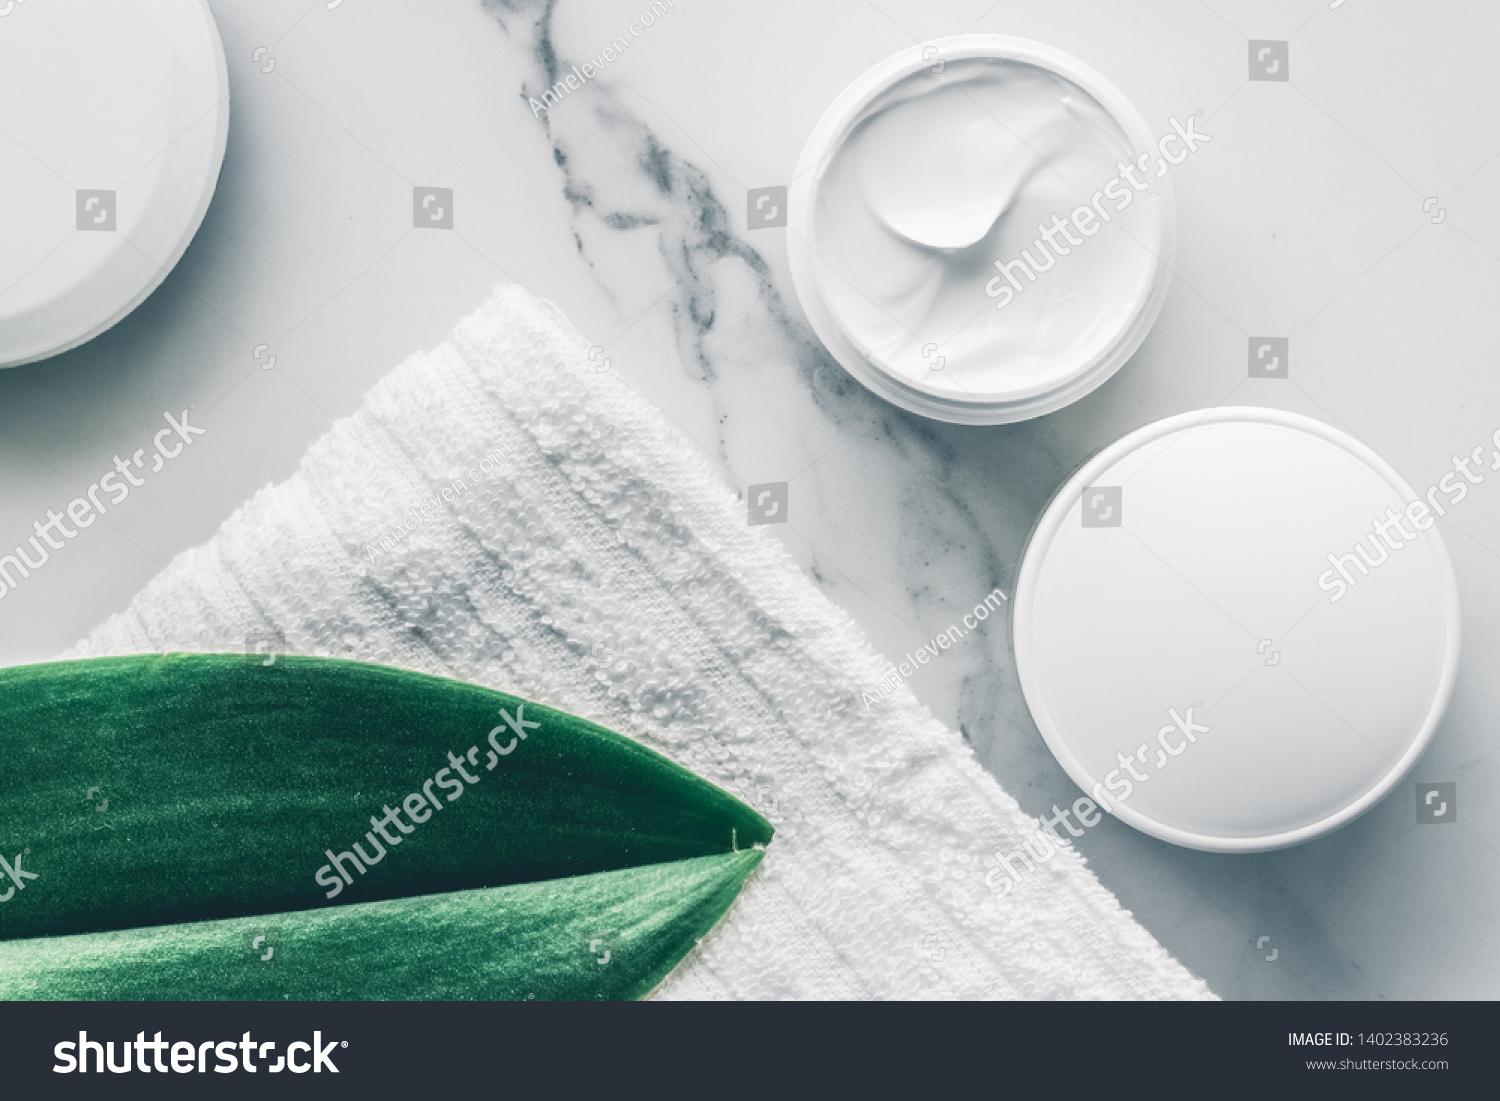 Skincare and body care, luxury spa and clean products concept - organic beauty cosmetics on marble, home spa flatlay background #1402383236